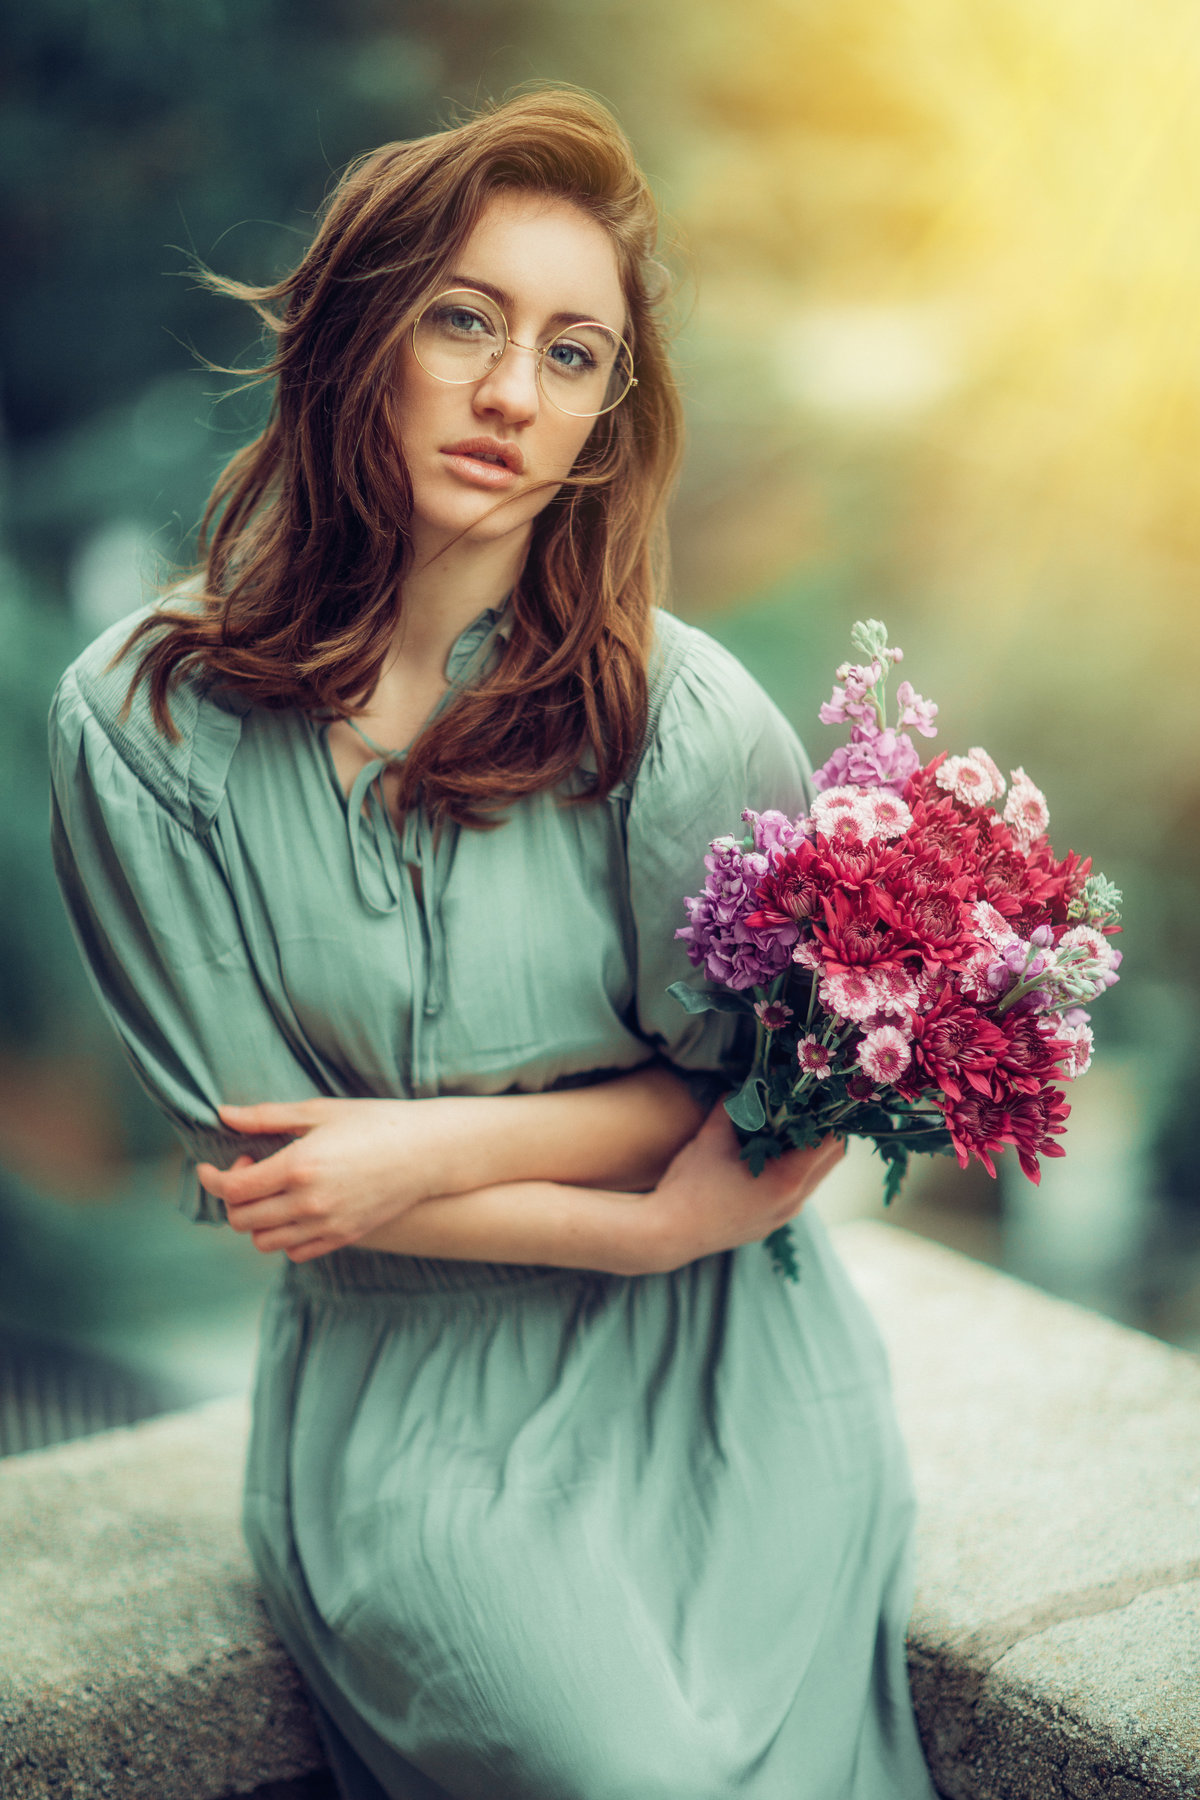 Portrait Photo Of Young Woman In Green Dress Holding Flowers Los Angeles